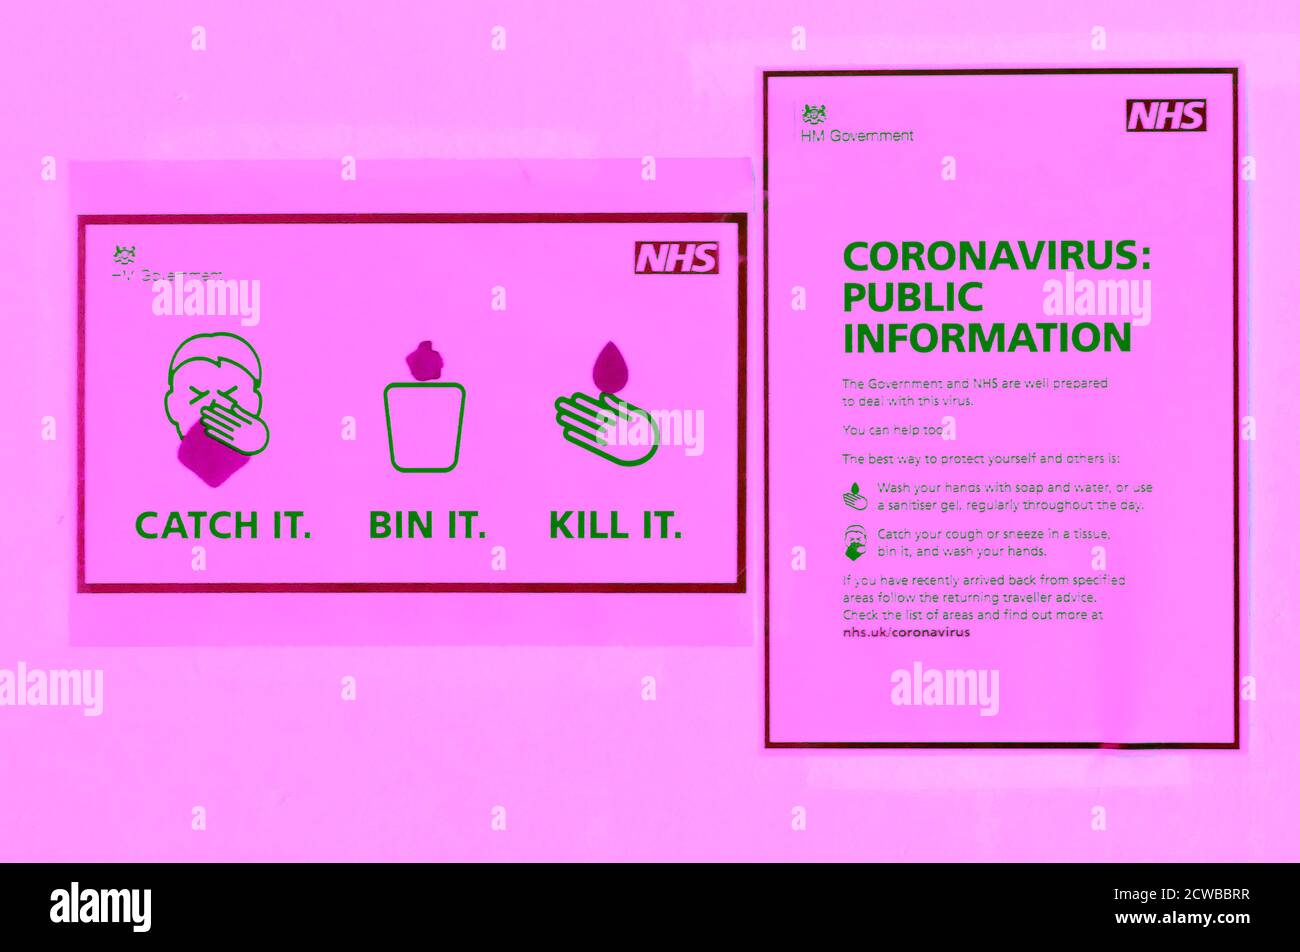 British National Health Service (NHS) guidelines on Corona Virus Symptoms. March 2020 Stock Photo